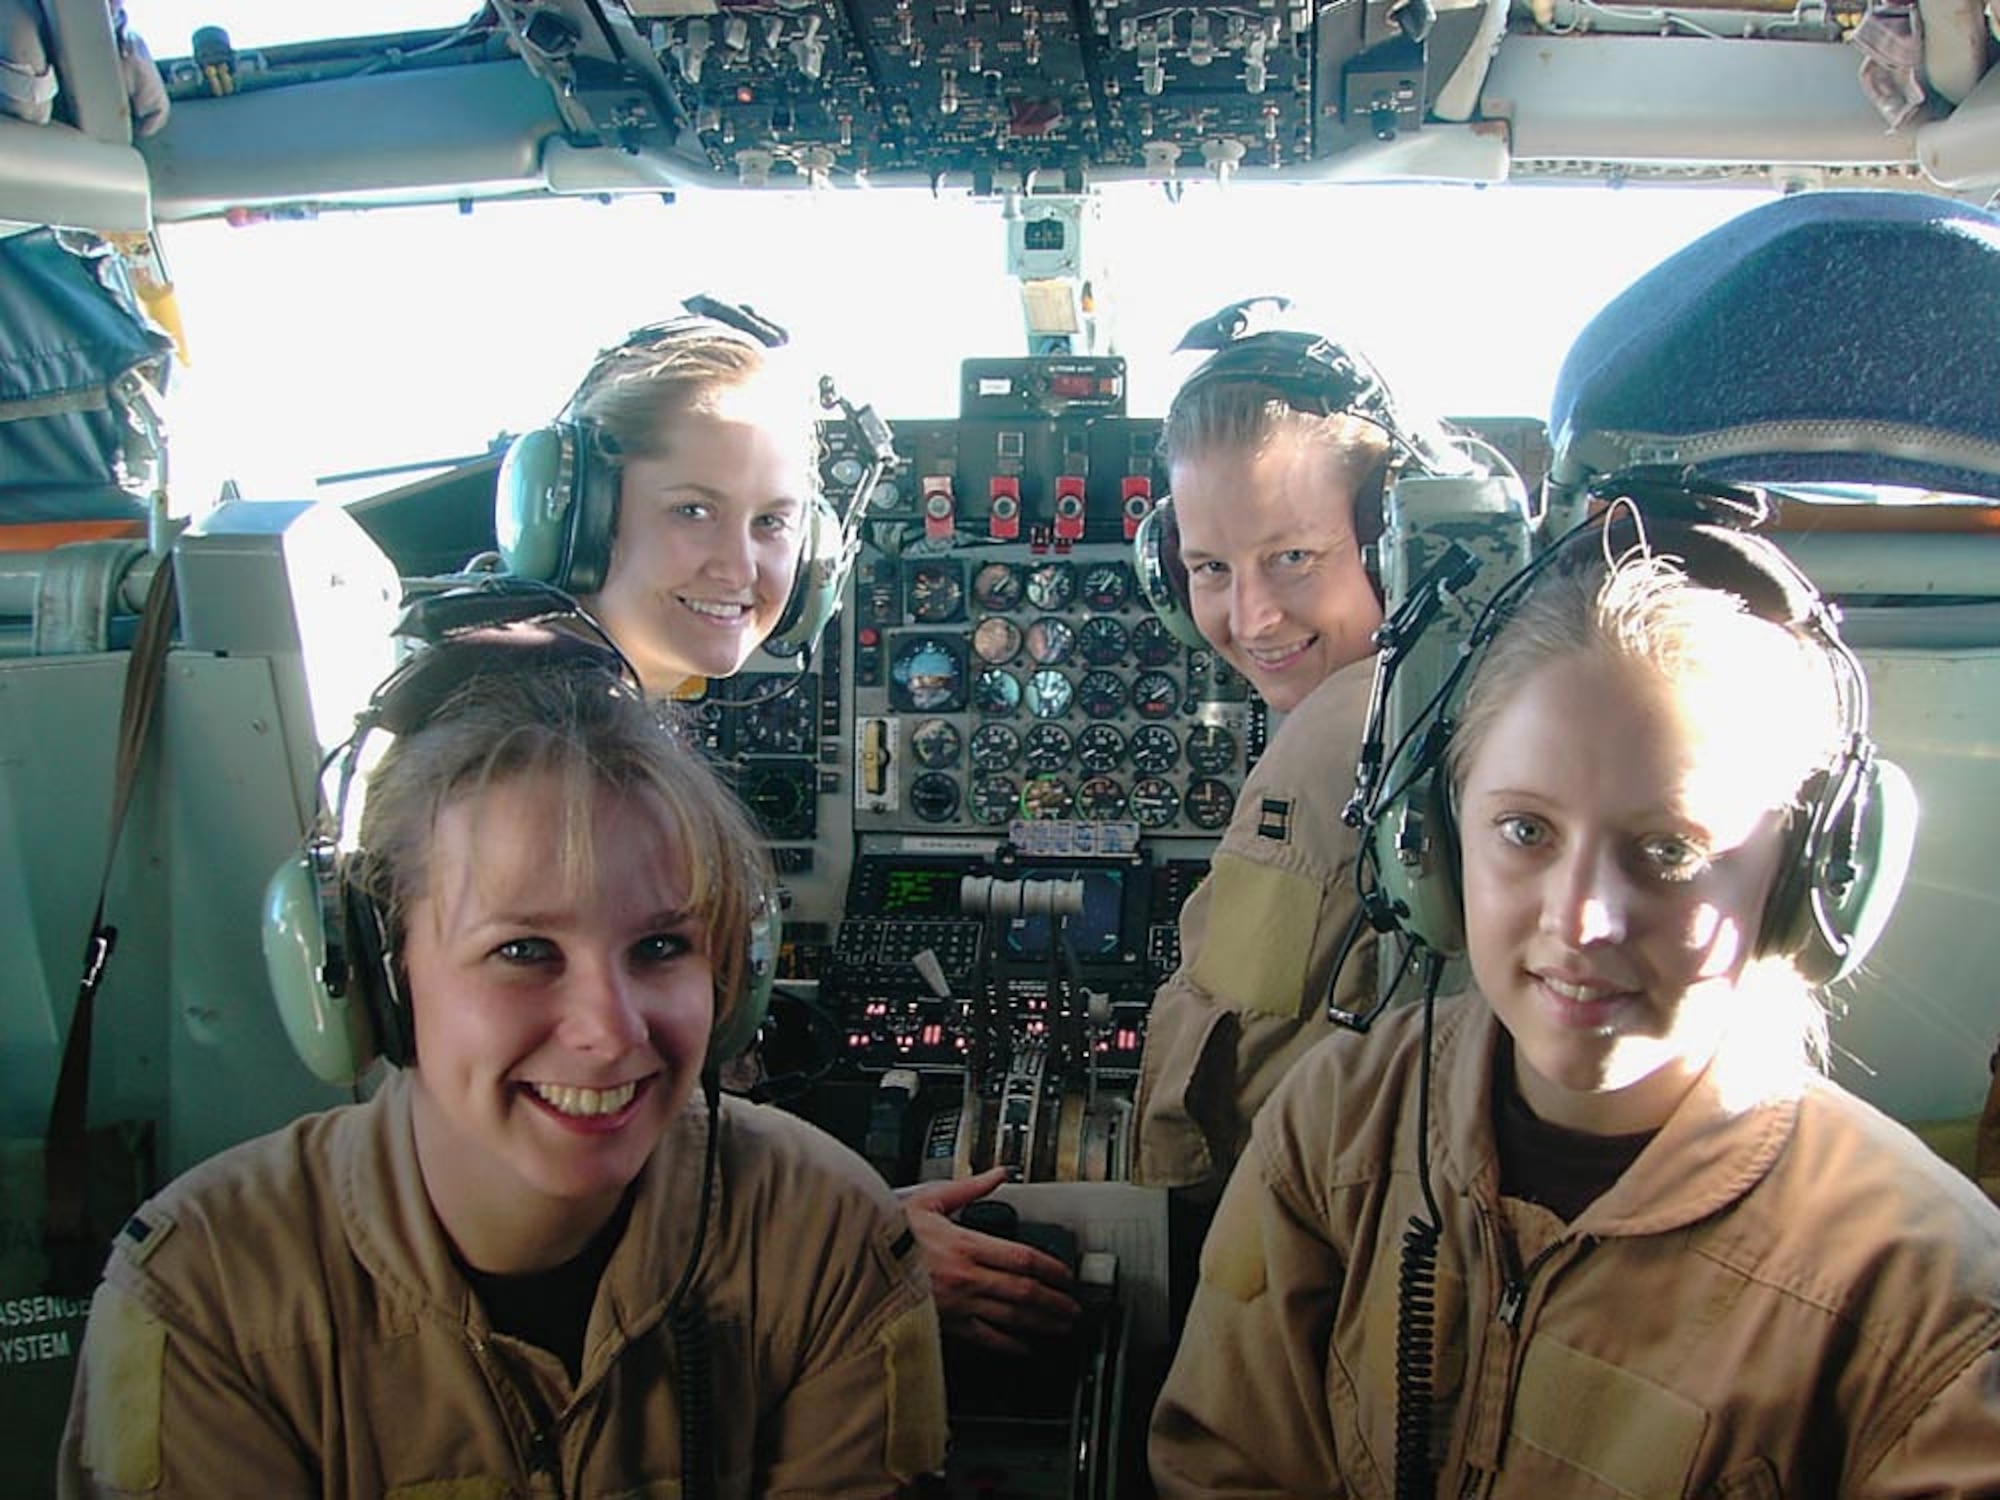 OPERATION ENDURING FREEDOM -- (Clockwise from lower left) 1st Lt. Alison, Capts. Heather and Waynetta and, Senior Airman Lyndi, all from the 376th Expeditionary Air Refueling Squadron, flew an all-female KC-135 Stratotanker air refueling mission over Afghanistan on Jan. 31. (U.S. Air Force photo by Capt. Elizabeth Ortiz)